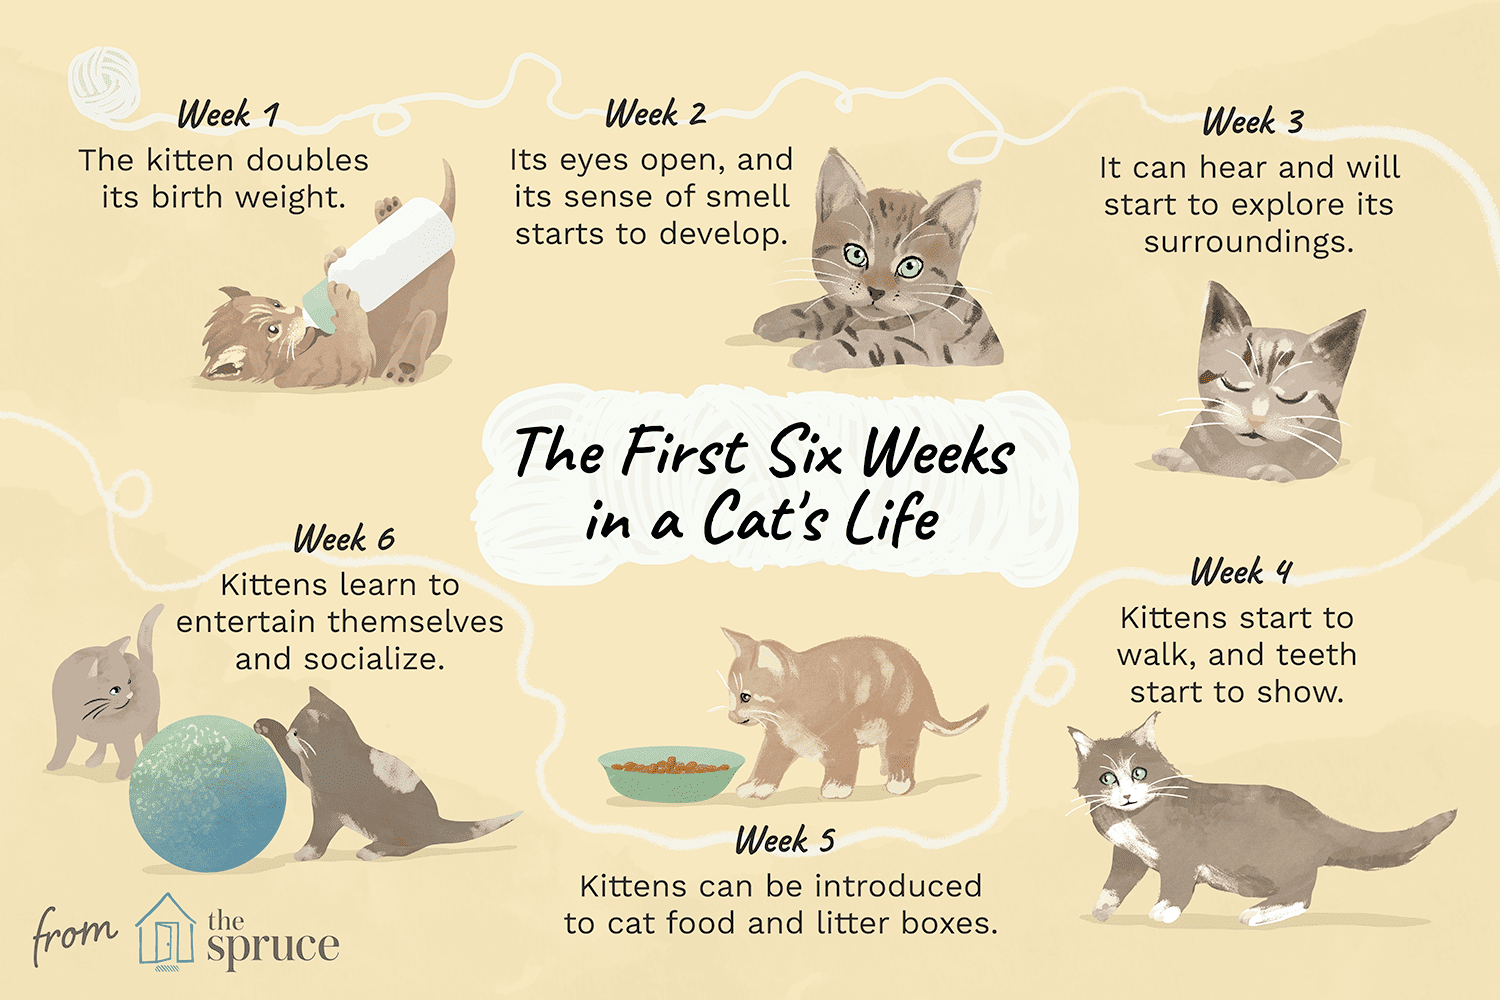 first 6 weeks of a cat's life illustration